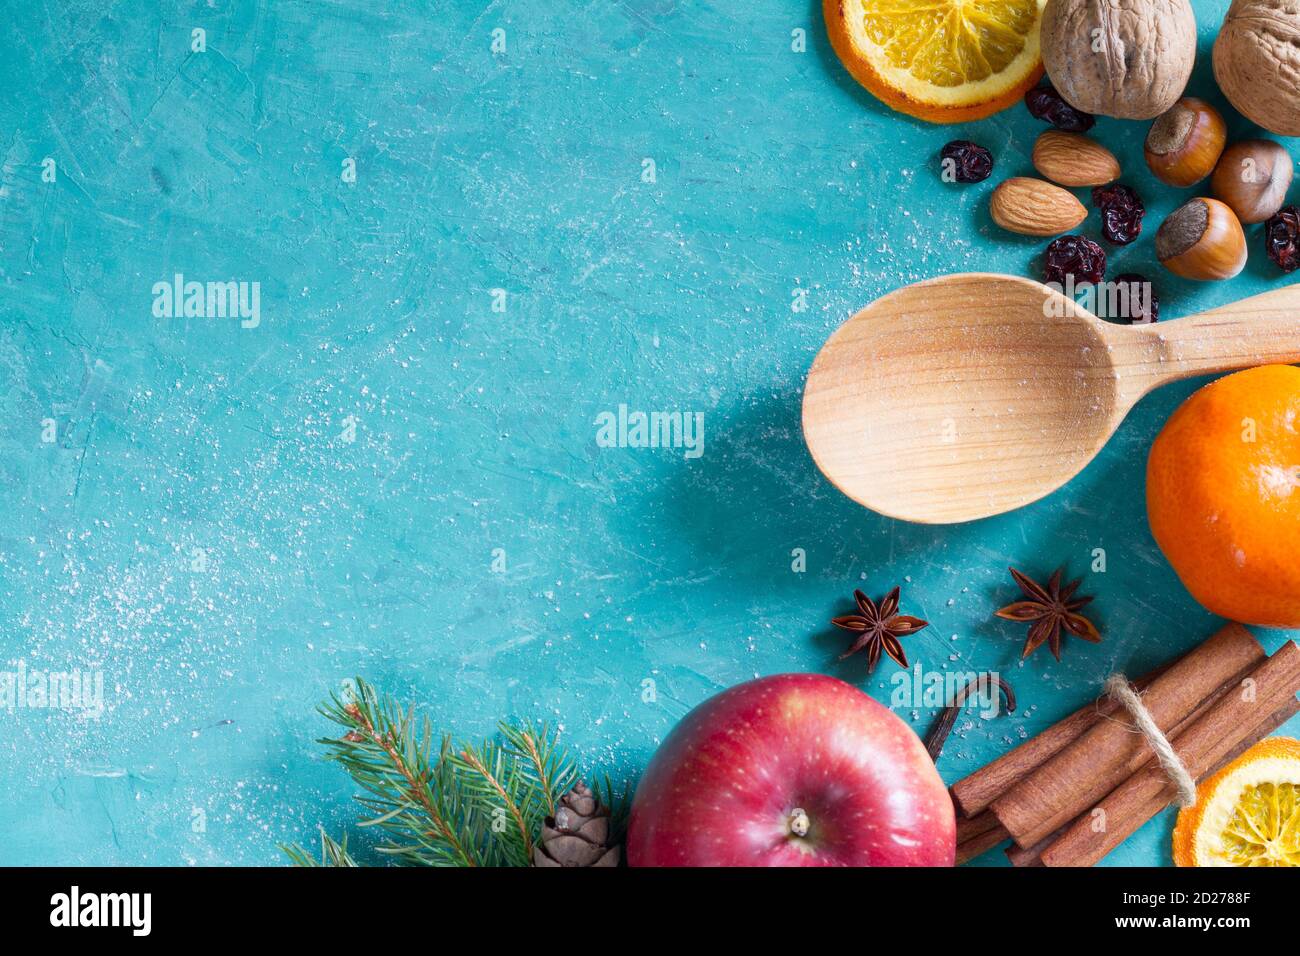 Christmas food background with fruits, spices and nuts Stock Photo